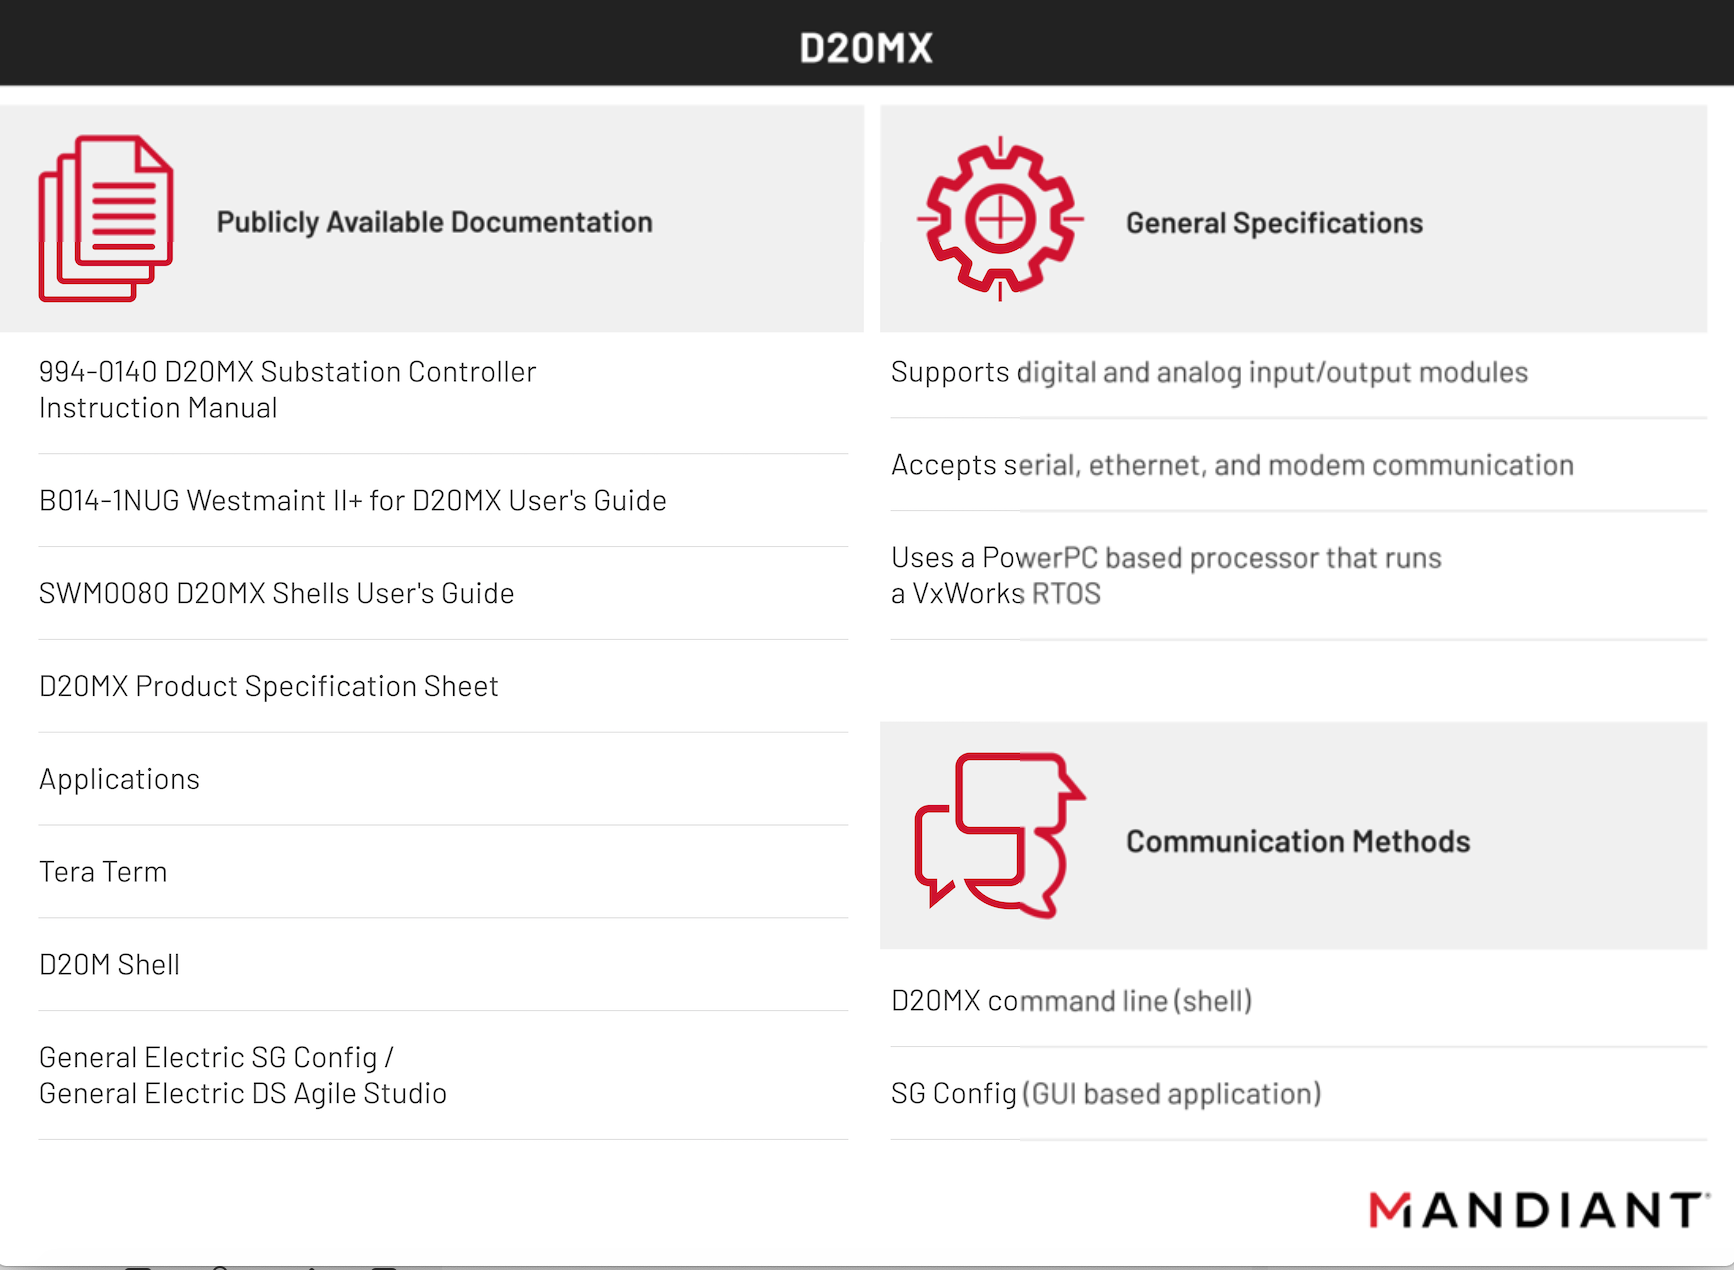 D20MX features and specifications based on publicly available information